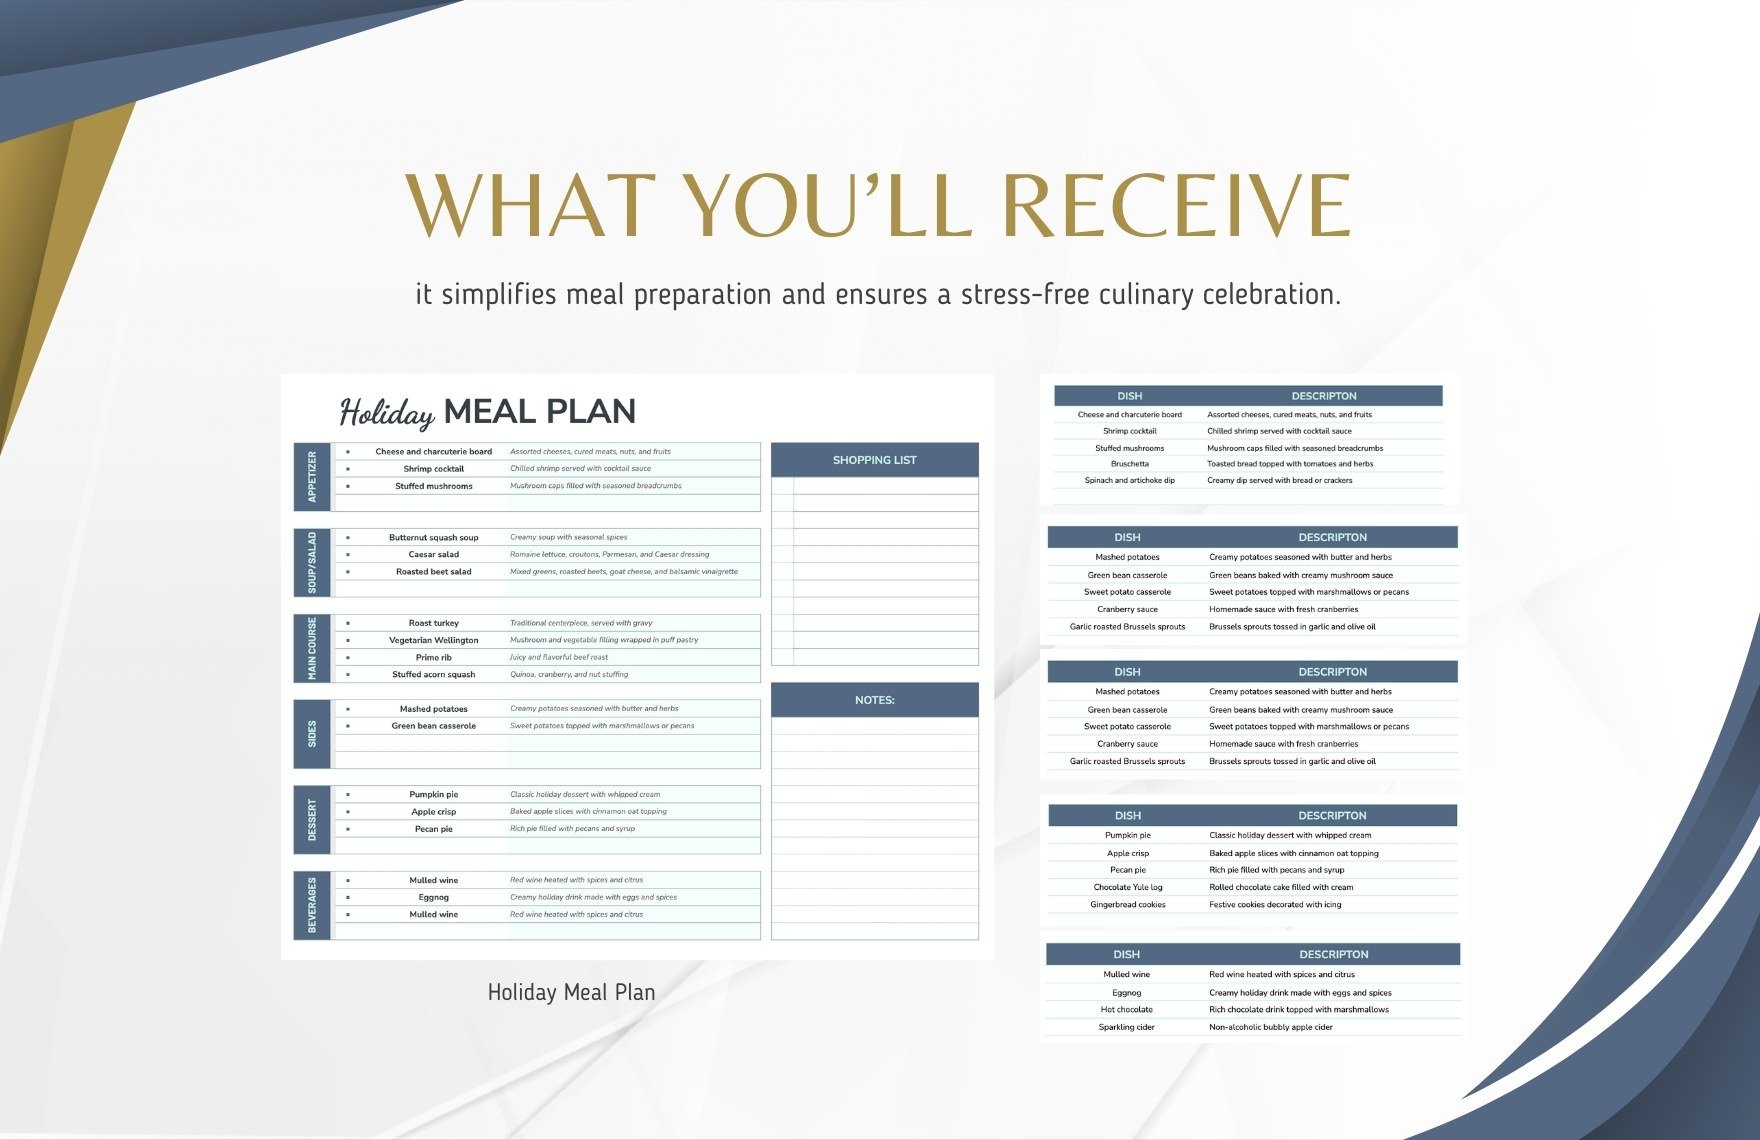 Holiday Meal Plan Template